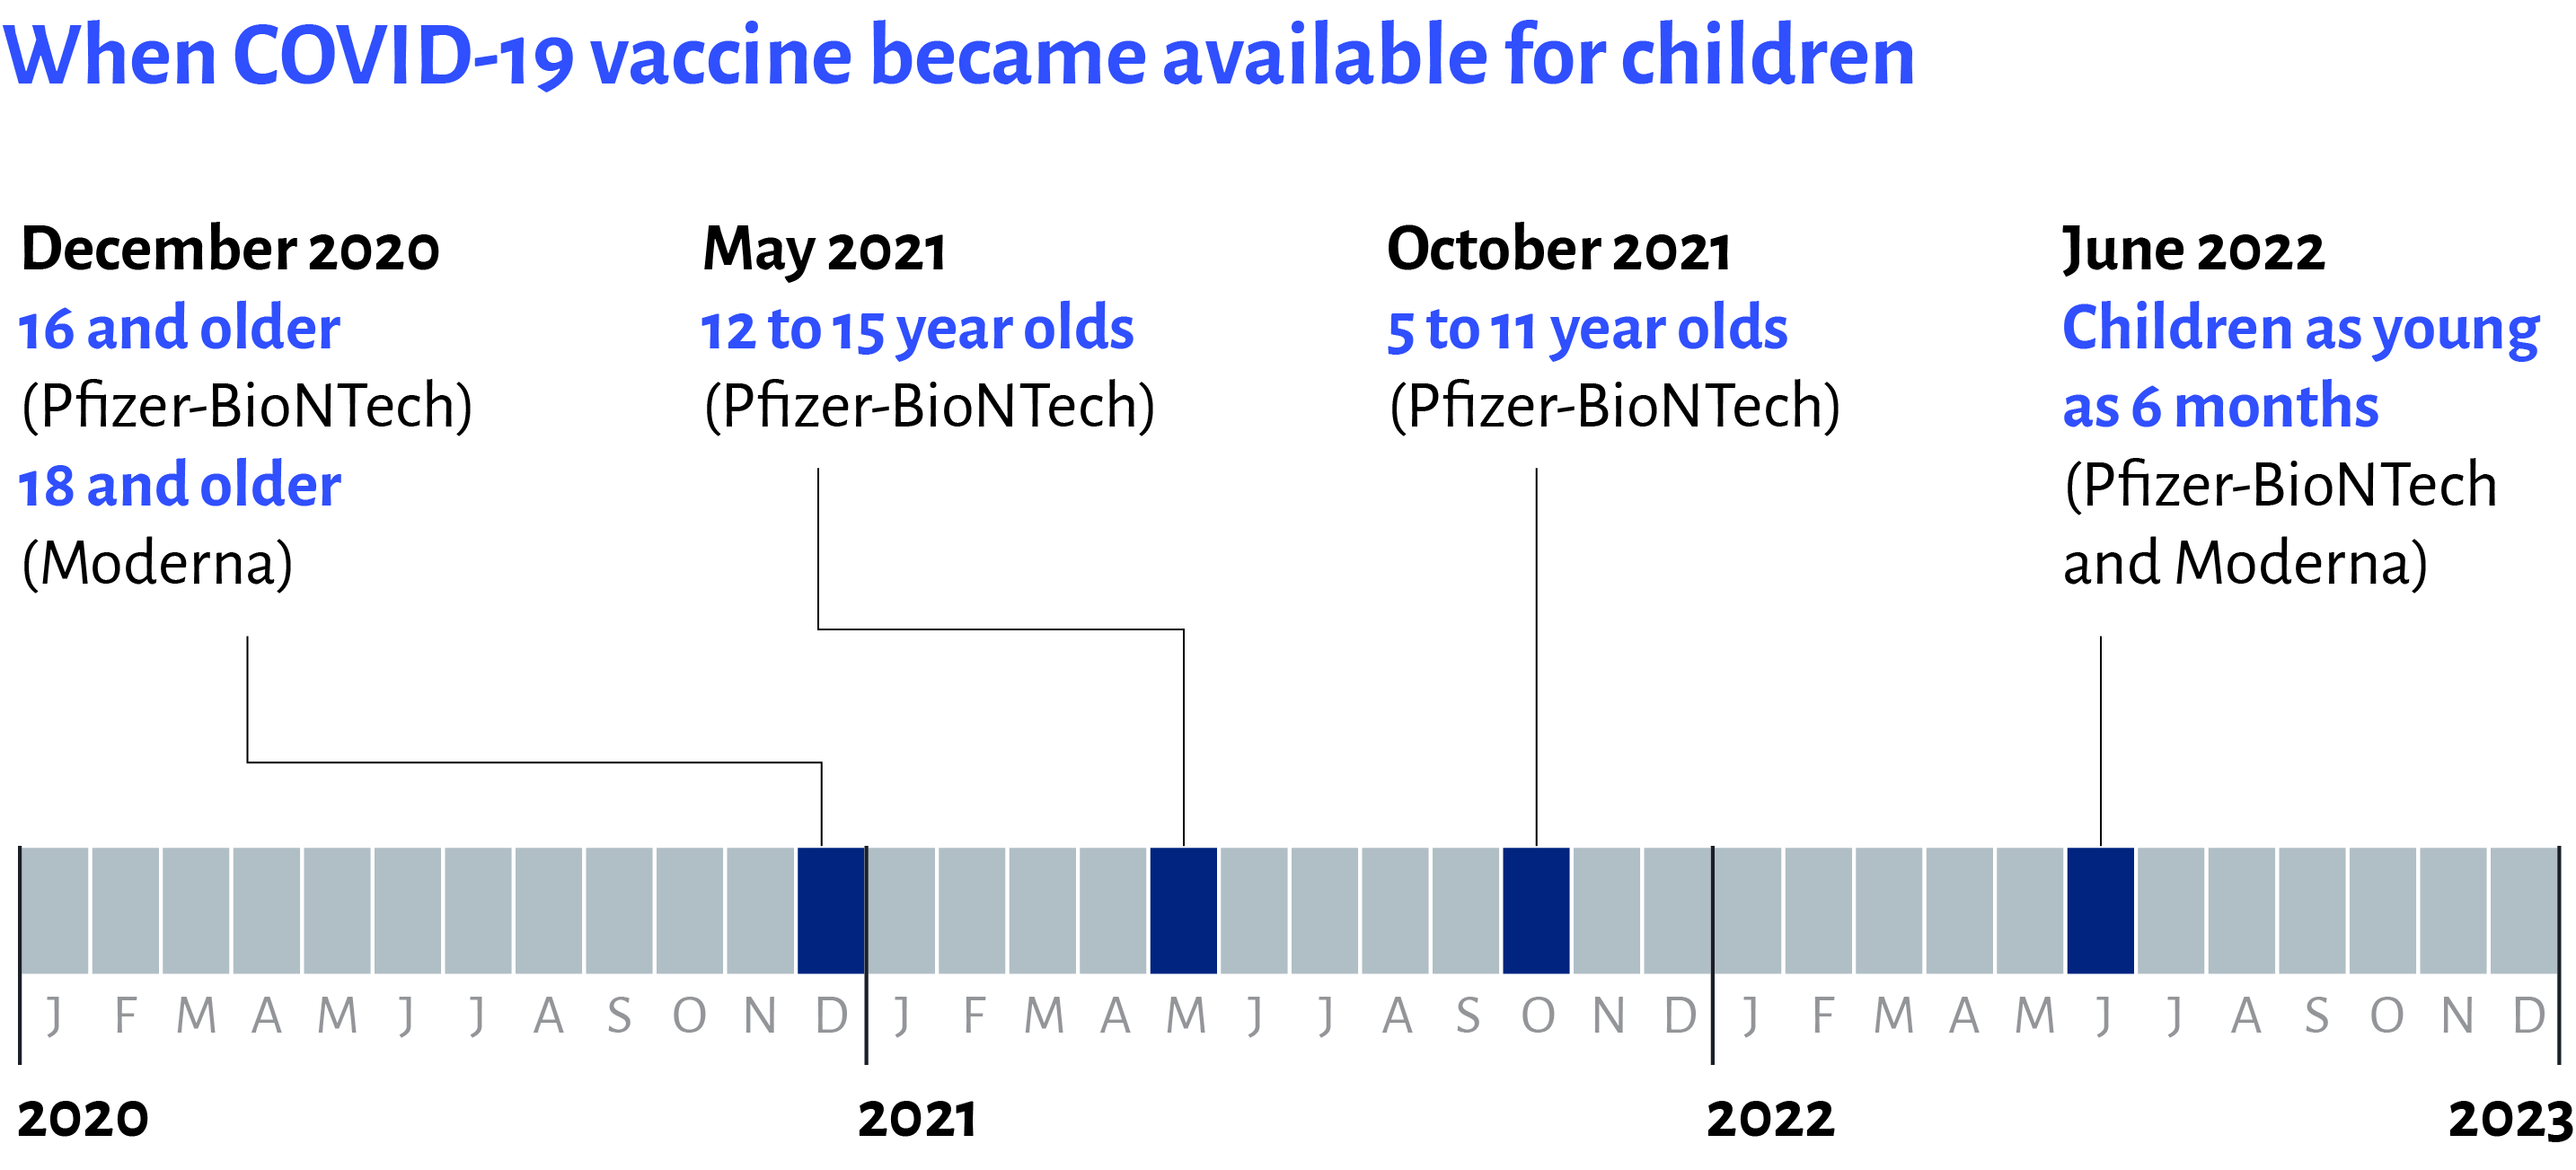 When COVID-19 vaccine became available for children